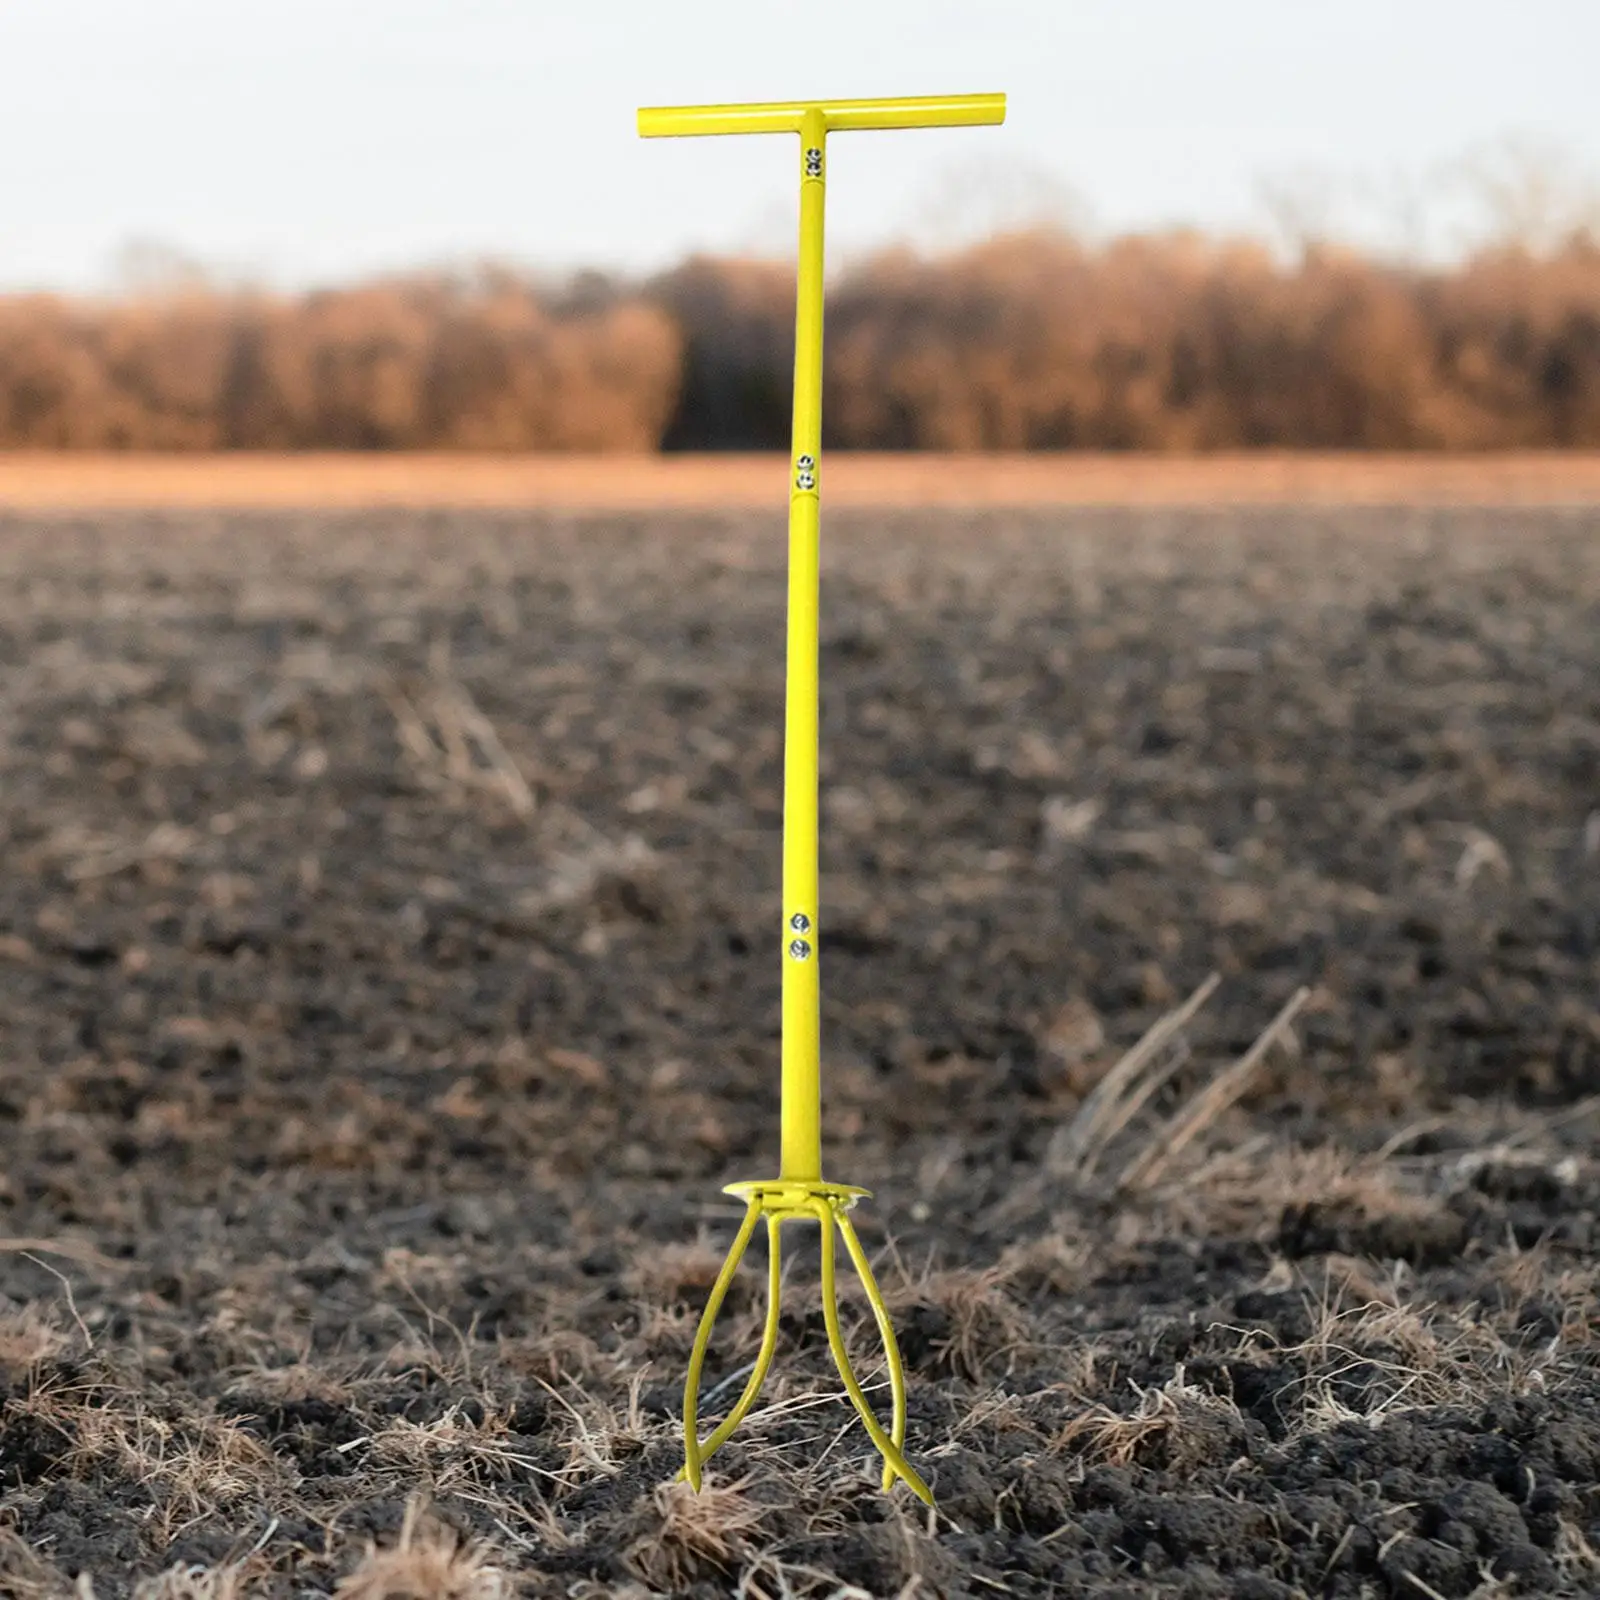 Manual Hand Tiller Detachable for Narrow and Wide Areas No Bending T Shaped Handle Agriculture Farmer Tool Manual Soil Grabber